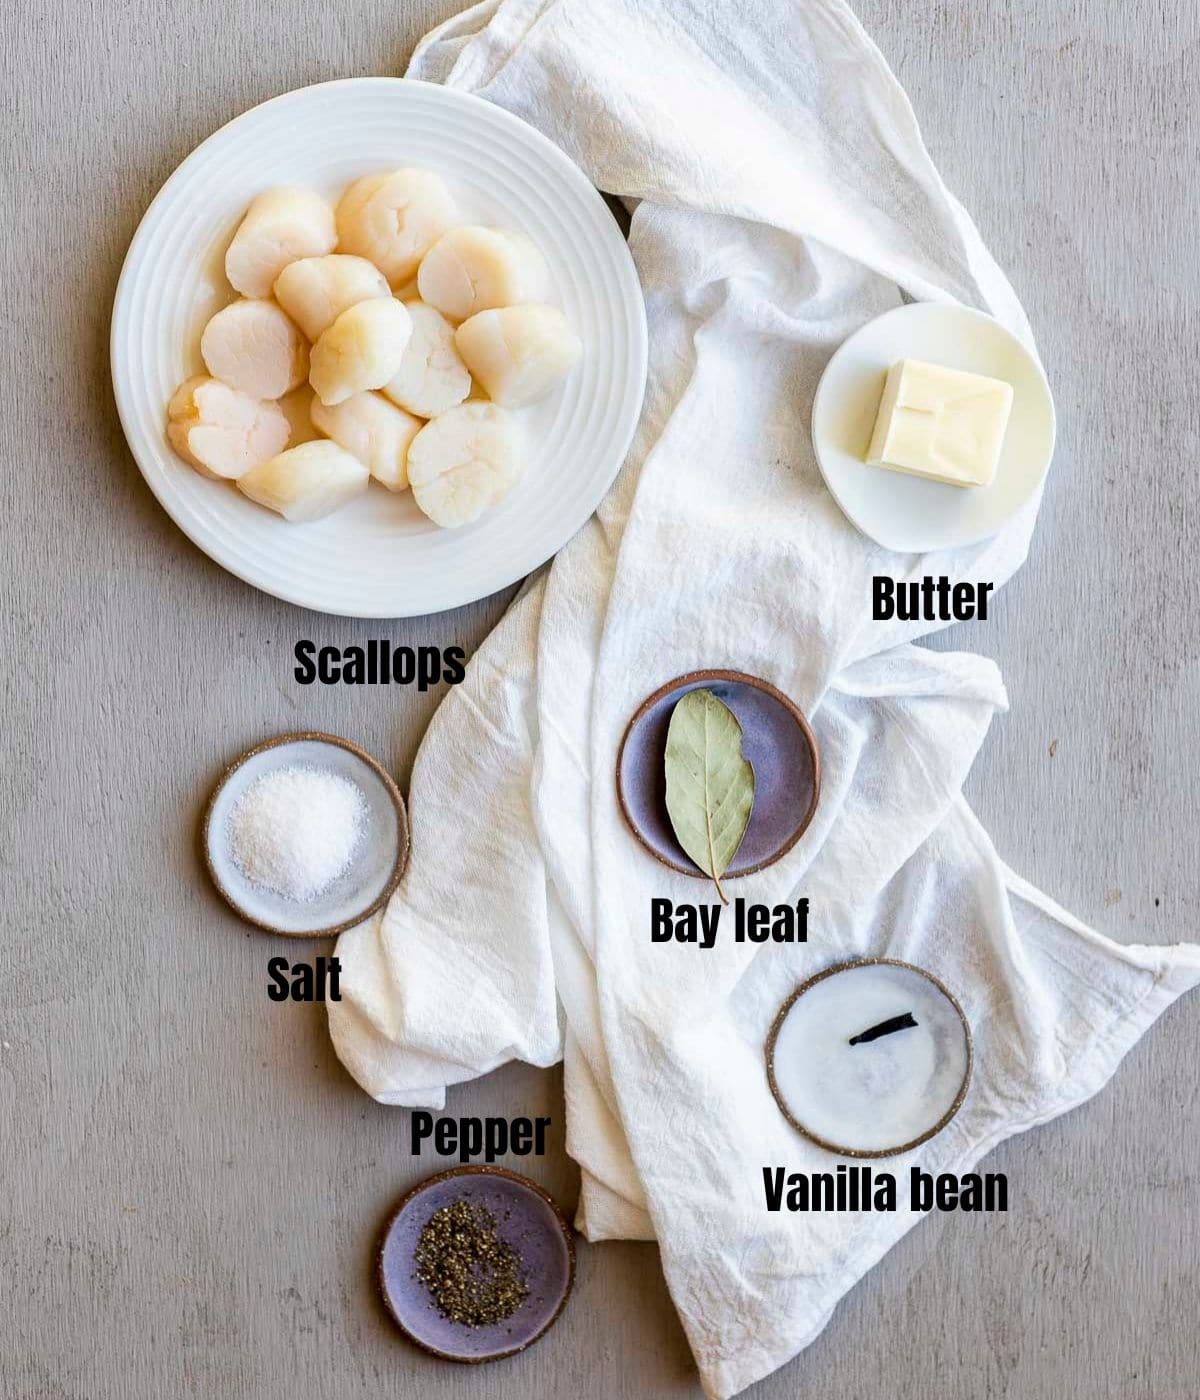 Ingredients to make broiled scallops arranged individually and labelled.